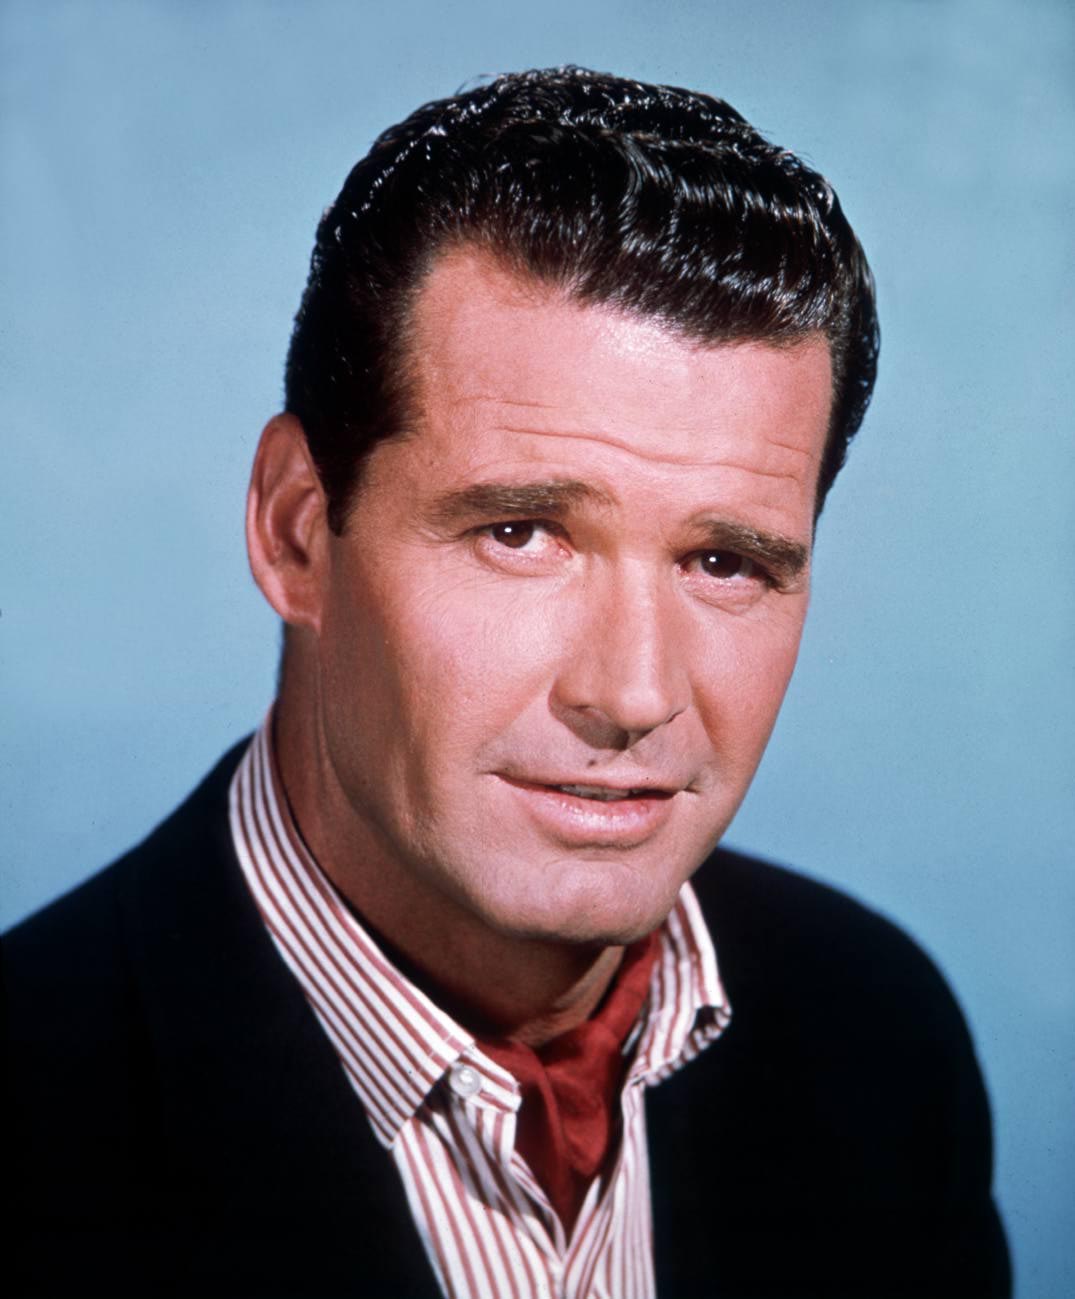 A portrait of American actor James Garner, on January 4, 1967. | Photo: Getty Images